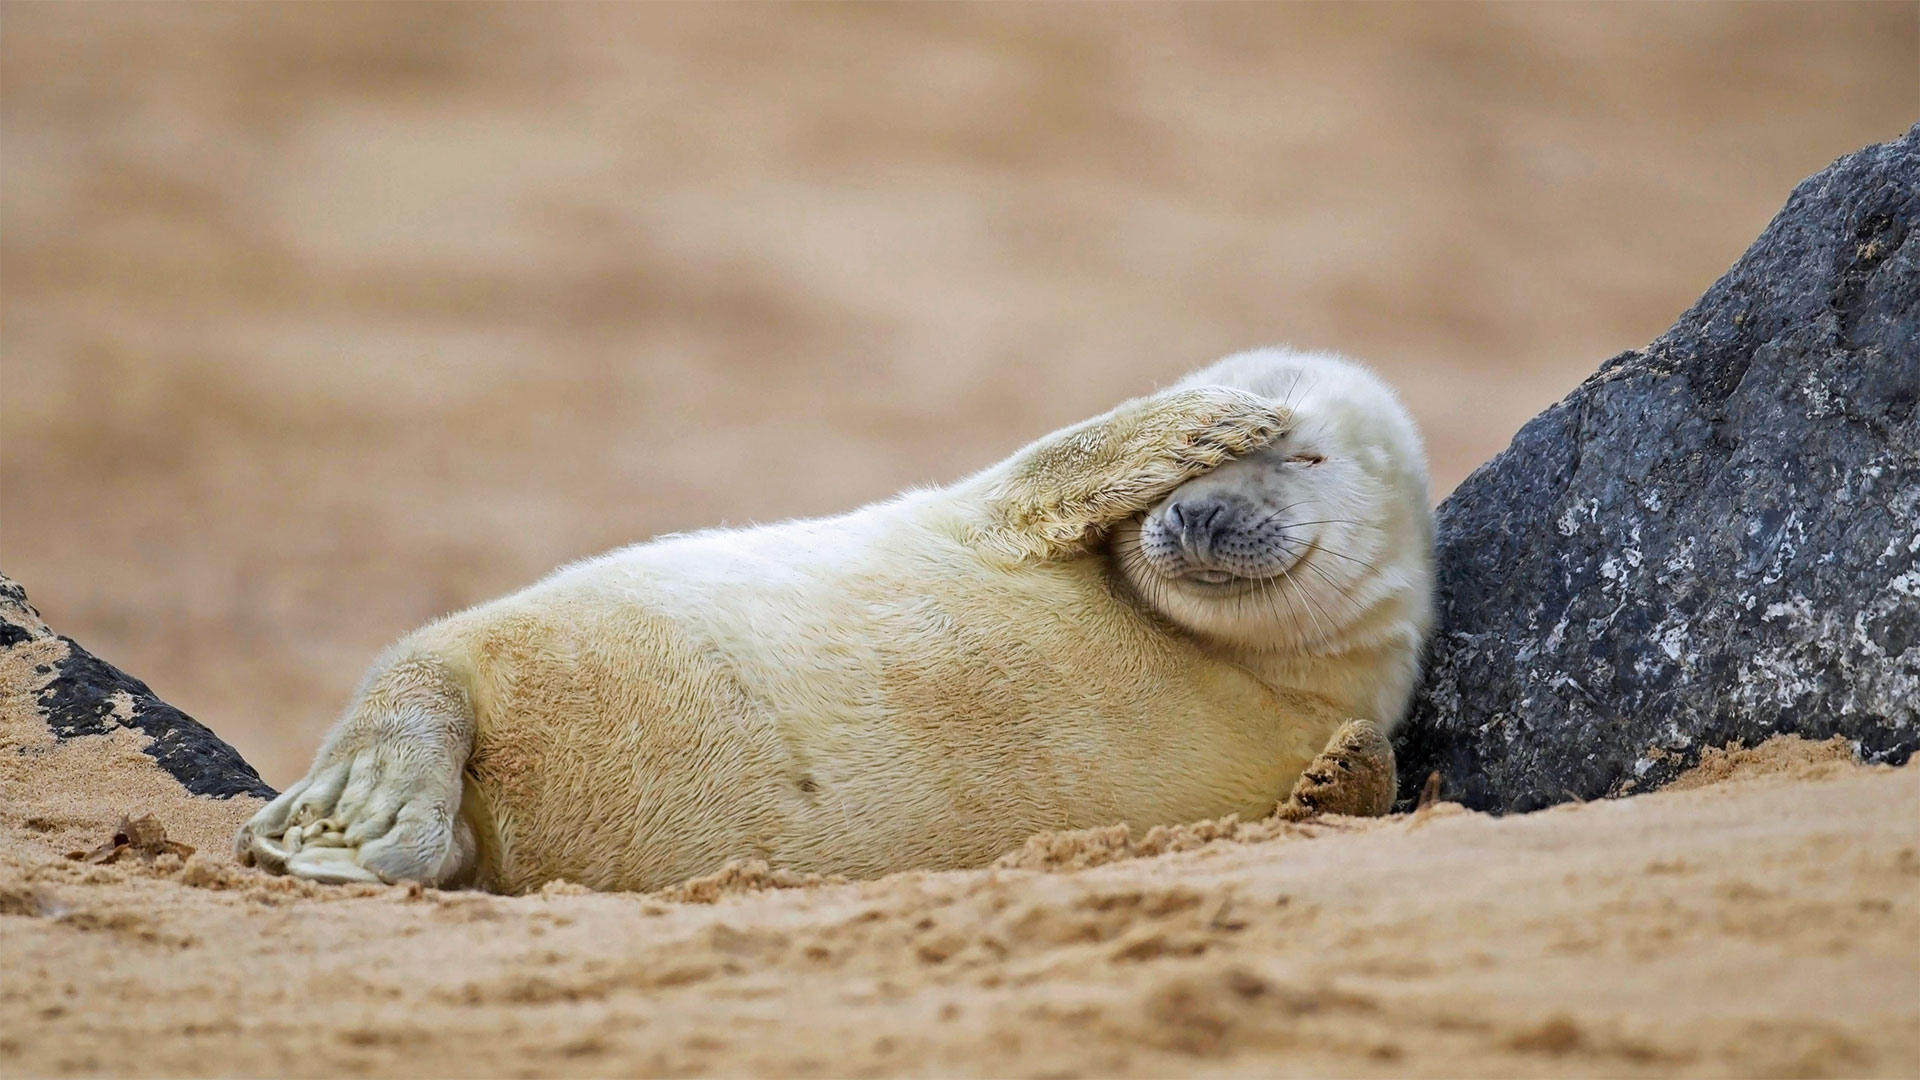 Gray seal pup resting on a beach in Blakeney National Nature Reserve, England - Kevin Sawford/Getty Images)